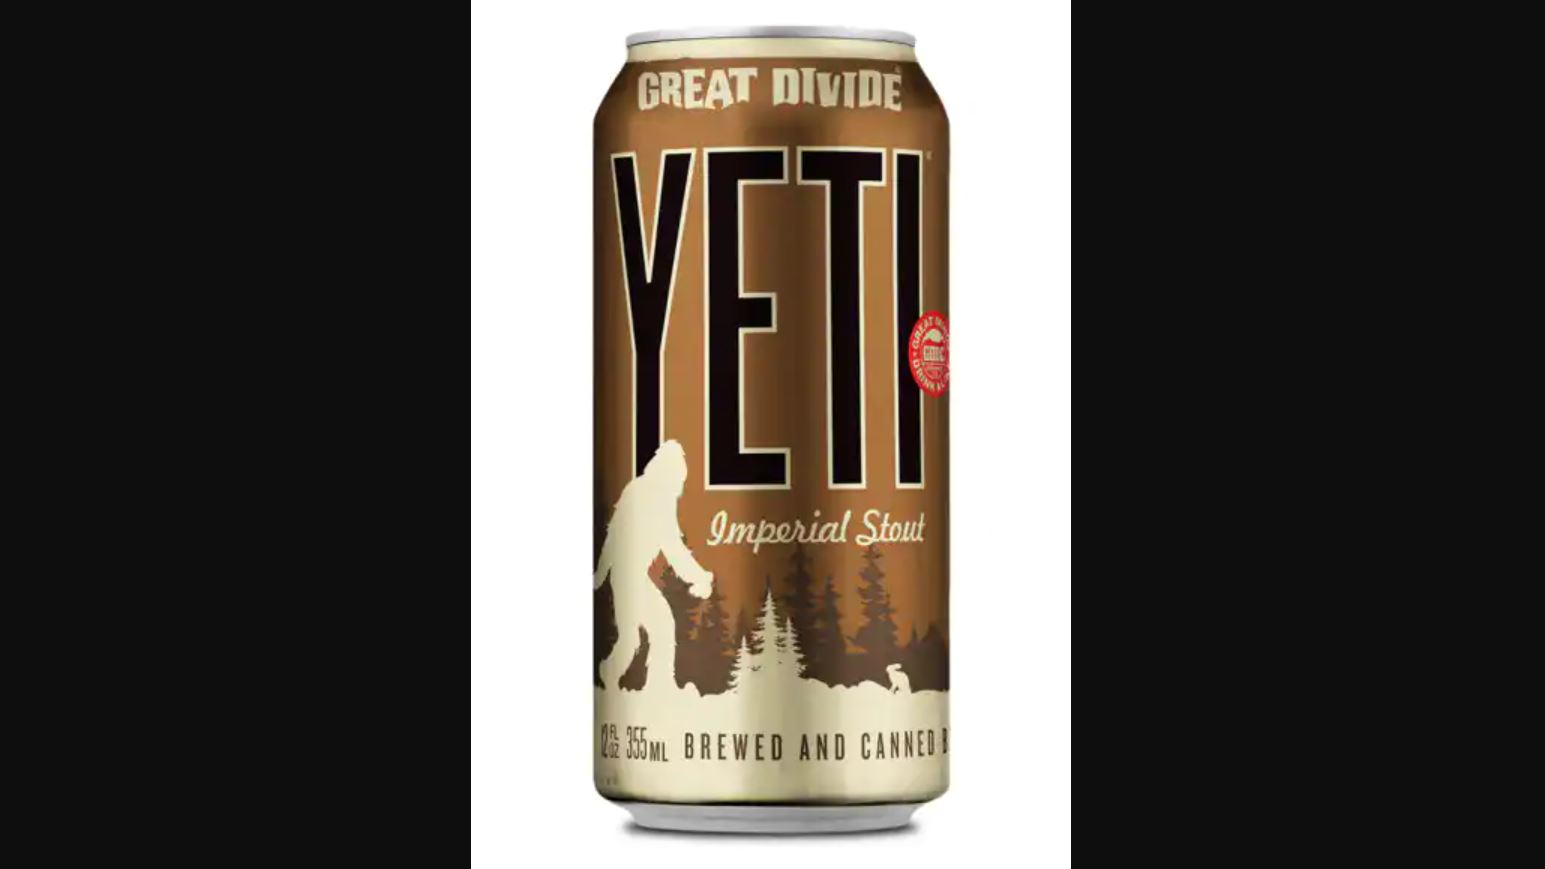 Great Divide Yeti Stout